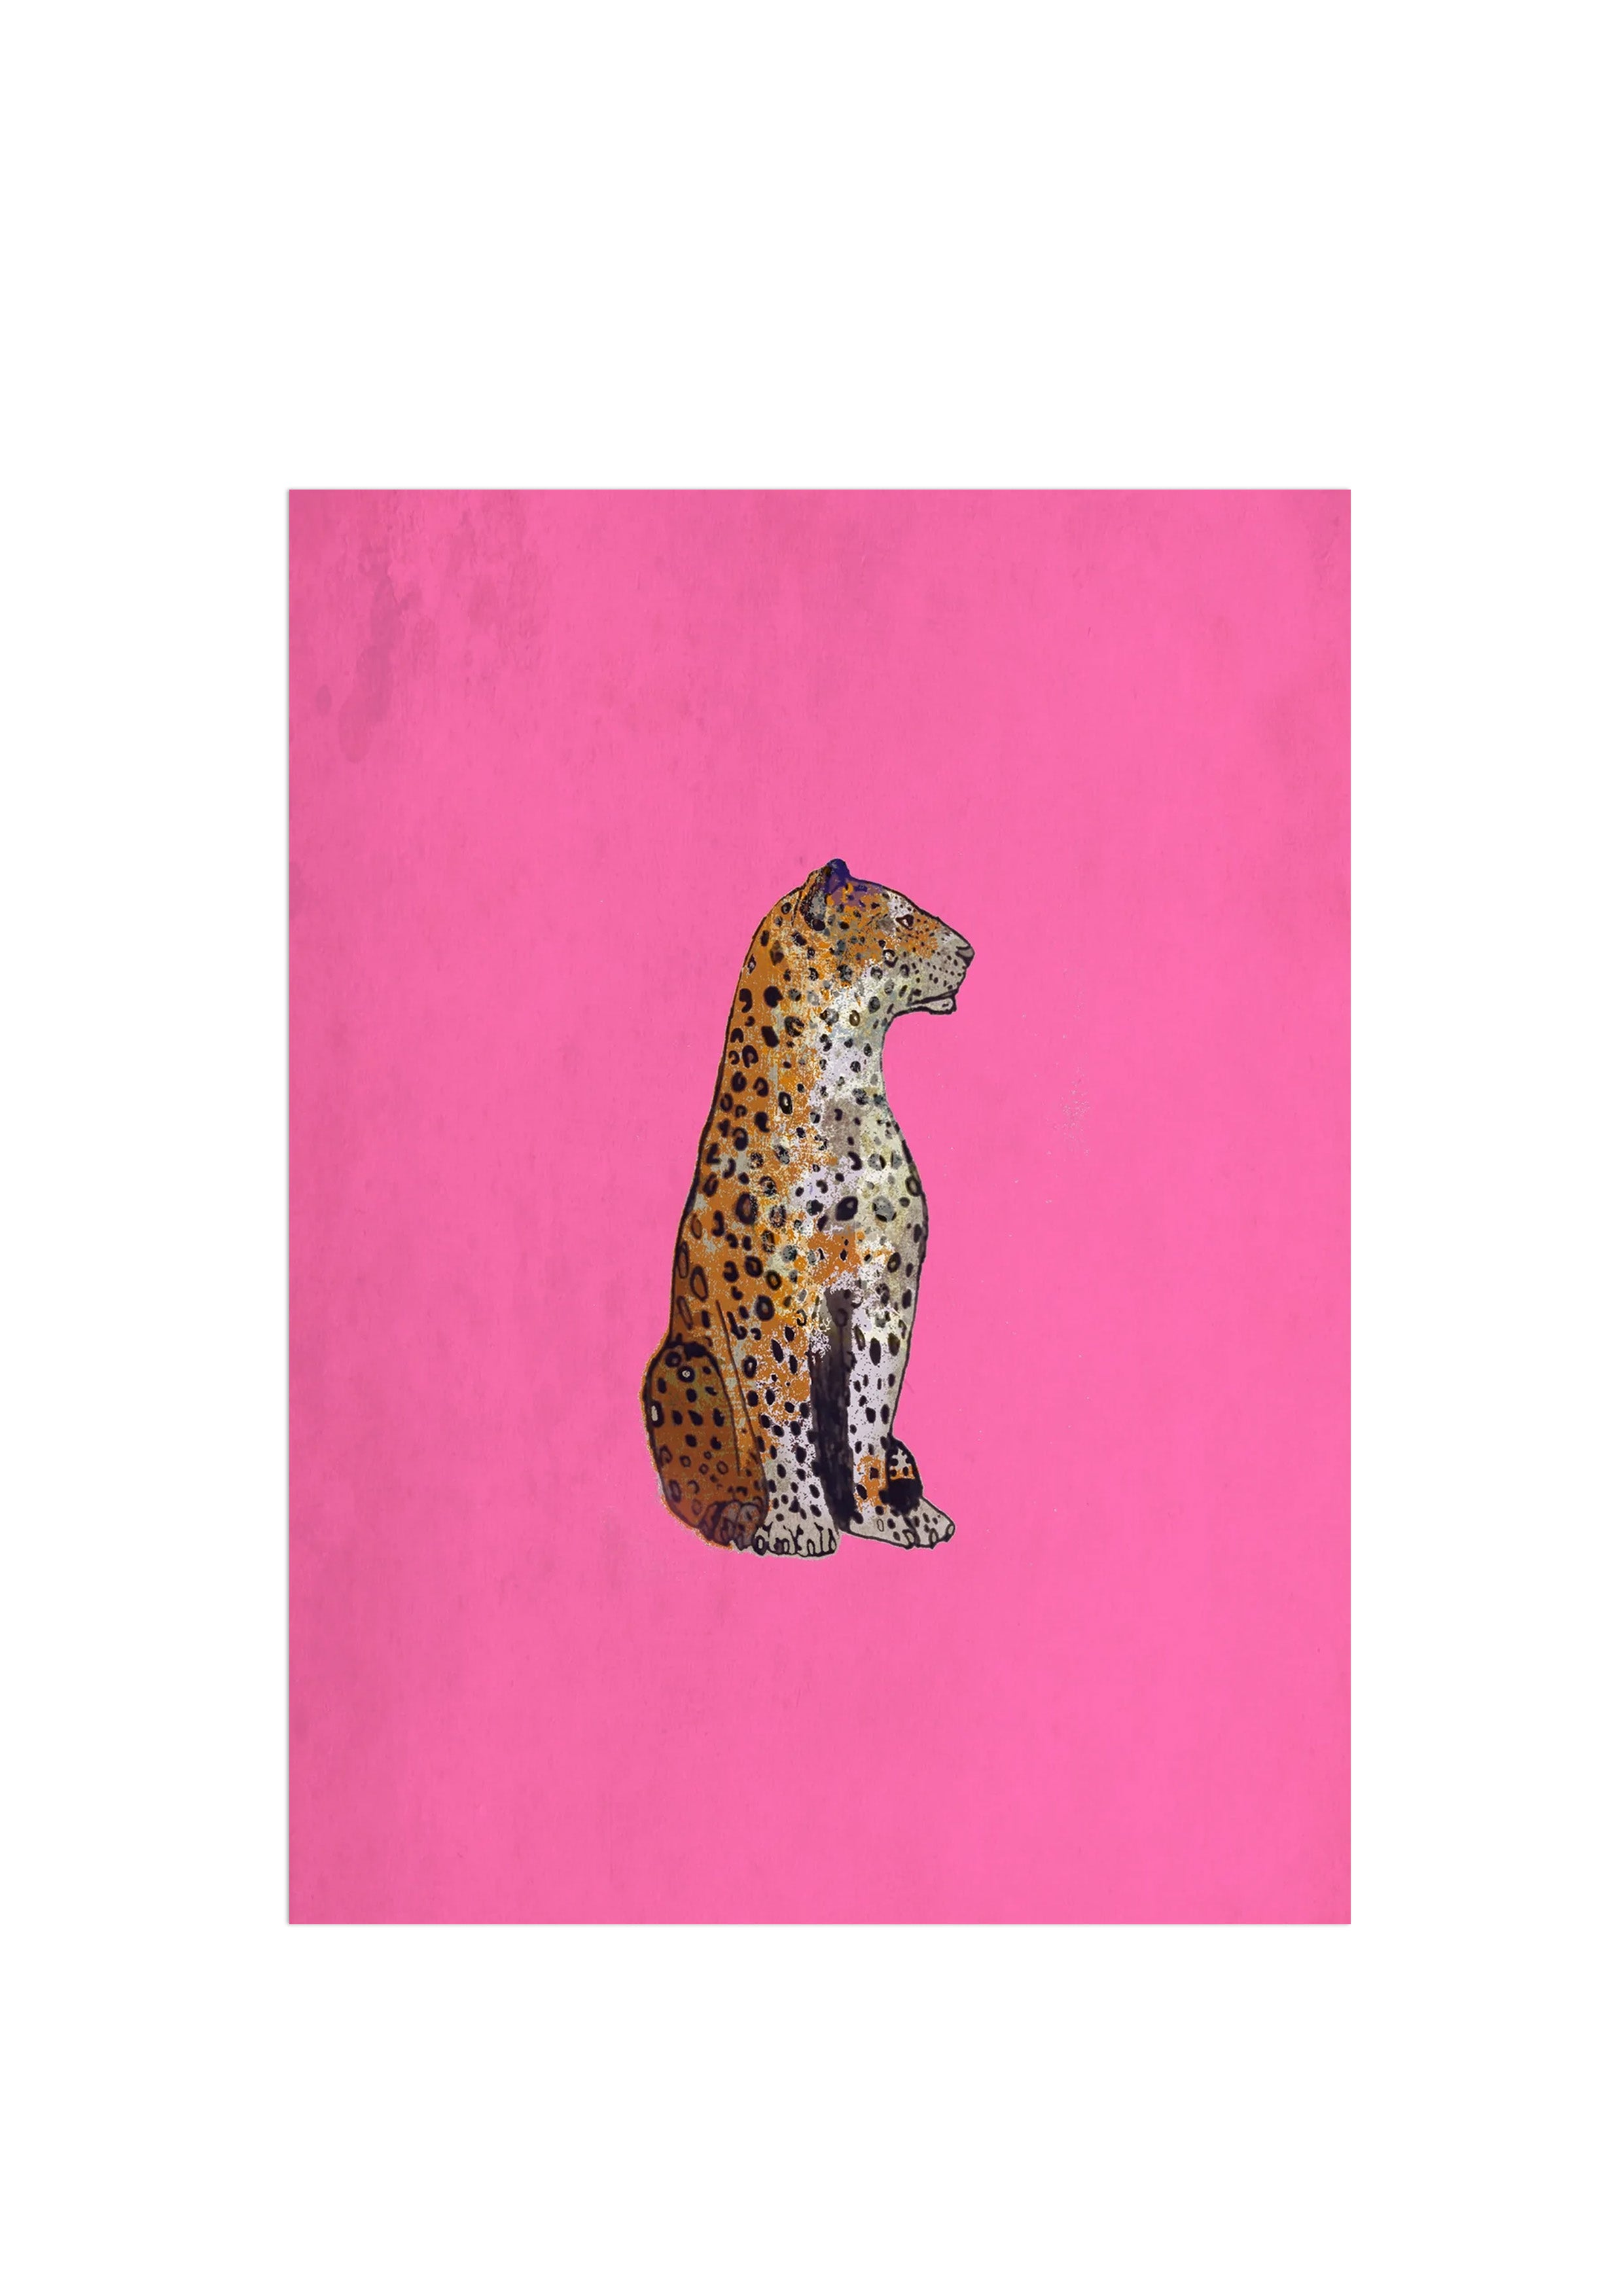 Signed Print / The Leopard Statue – Jessica Russell Flint